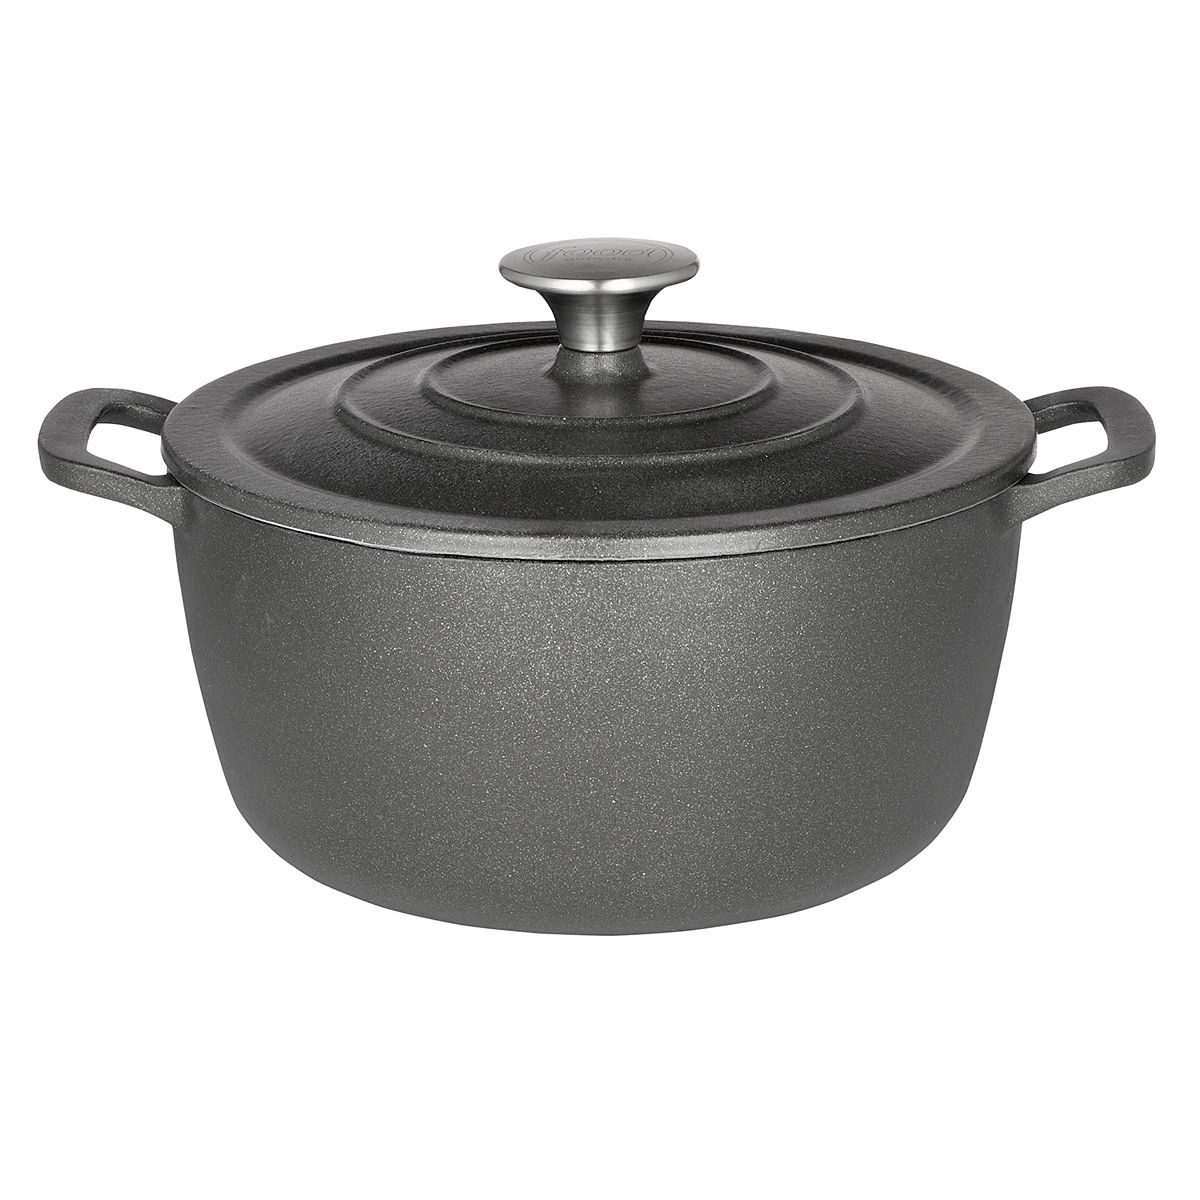 Food Network Dutch Oven Review: From a Chef's Perspective